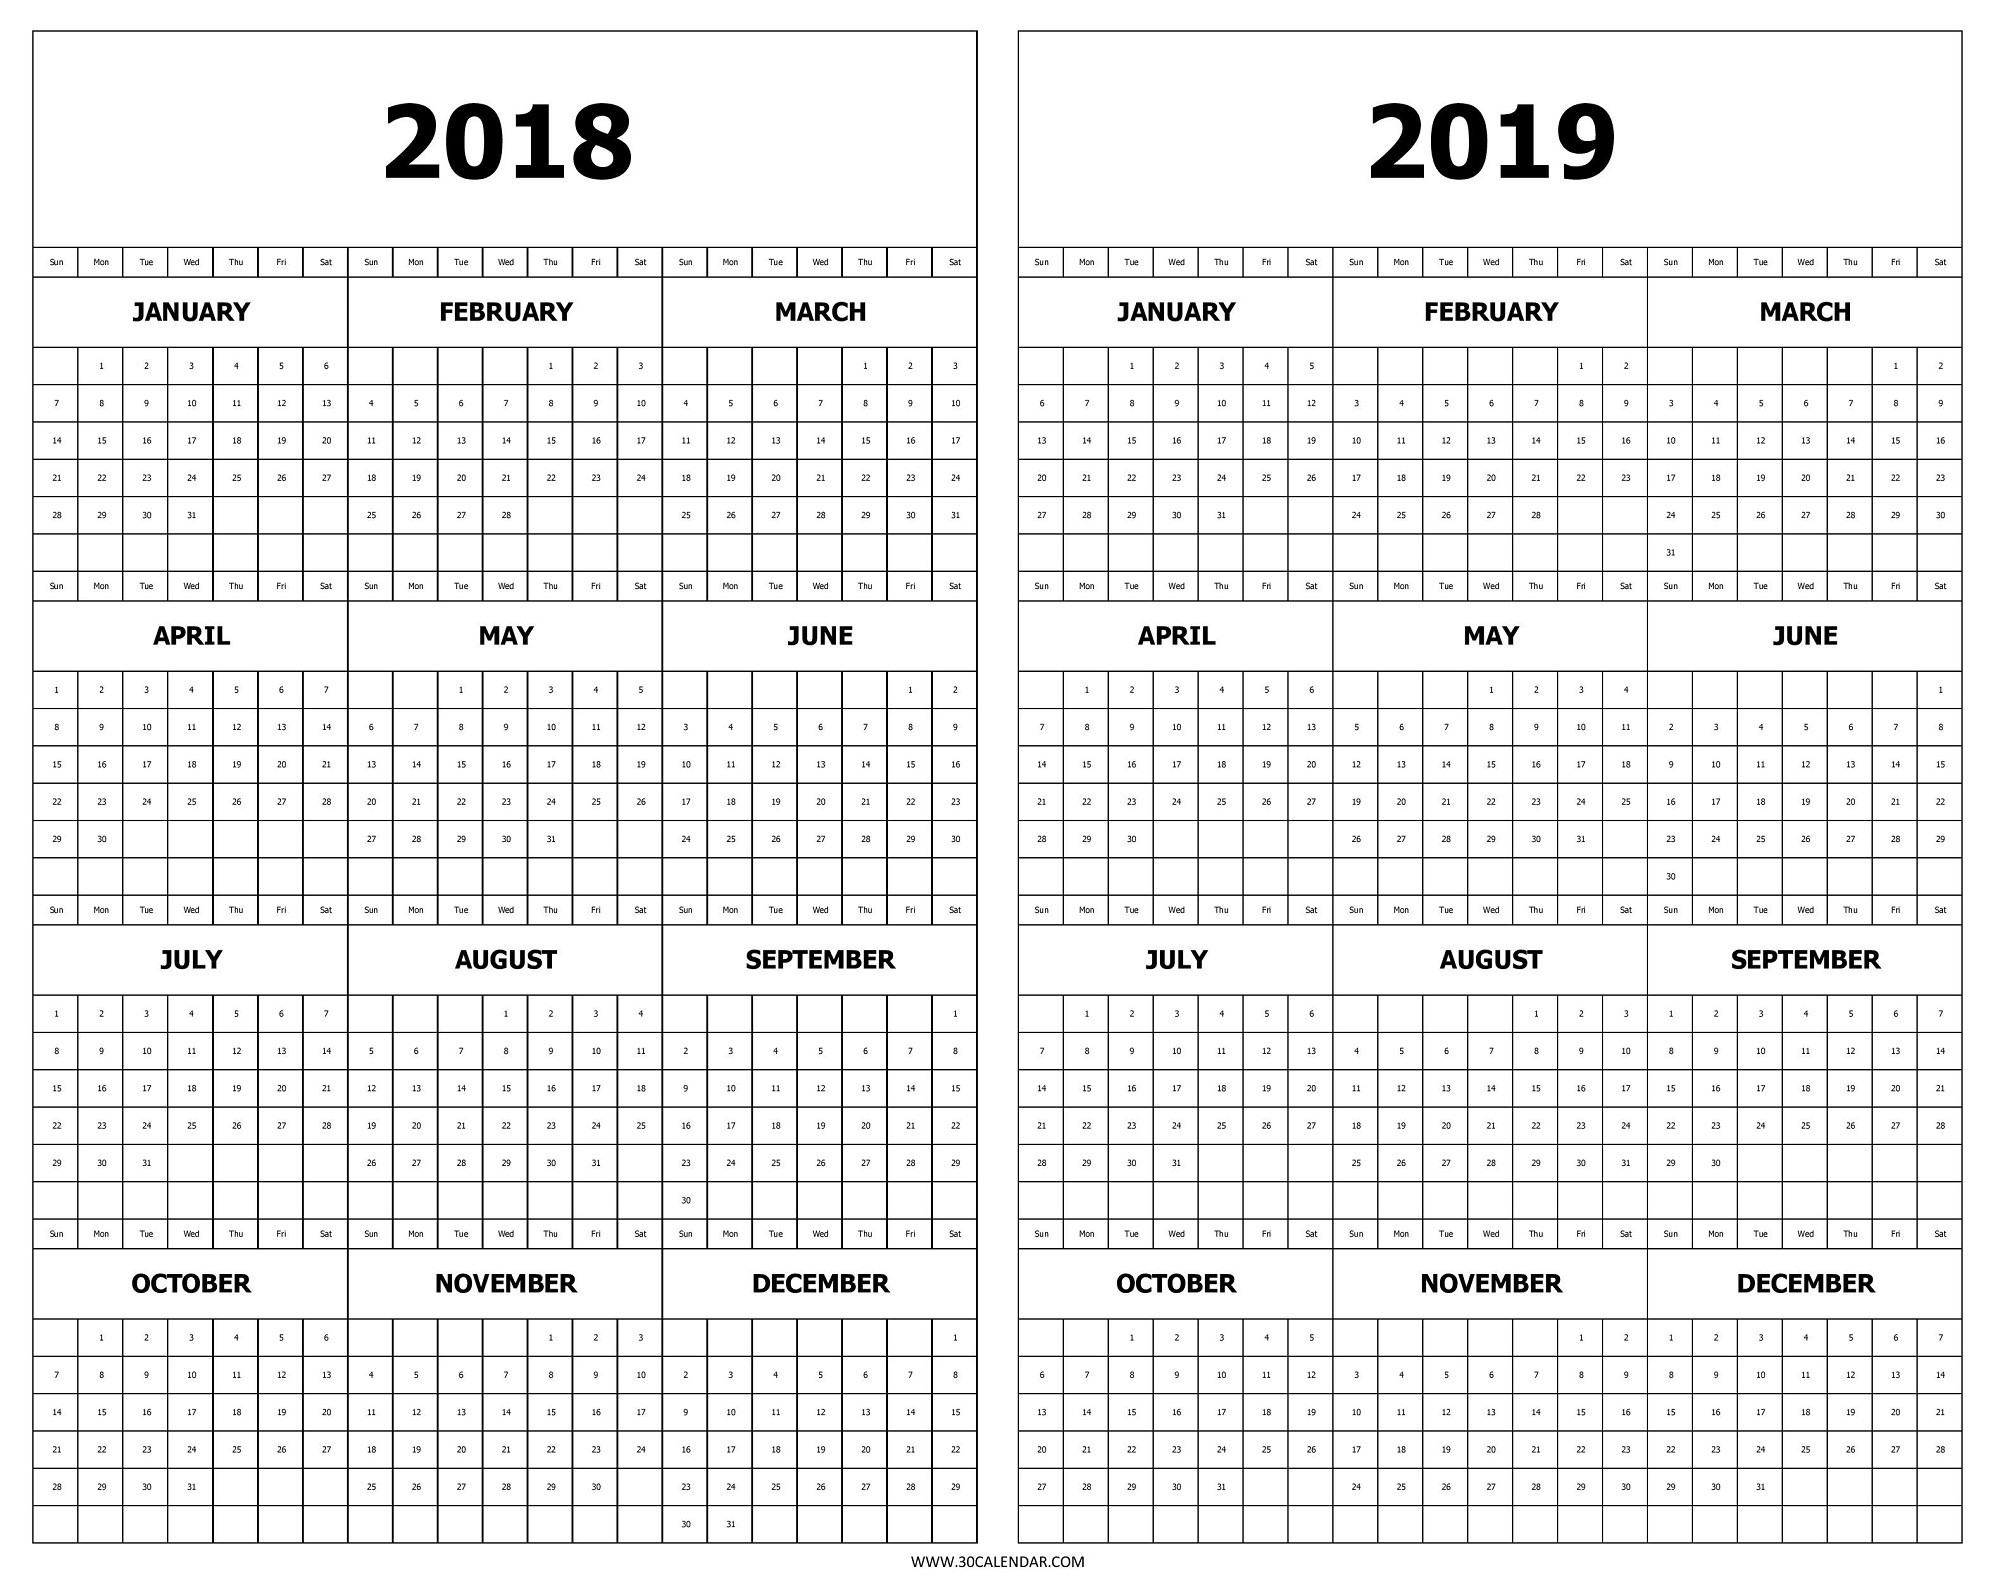 calendar 2018 and 2019 printable free 2 year at a glance